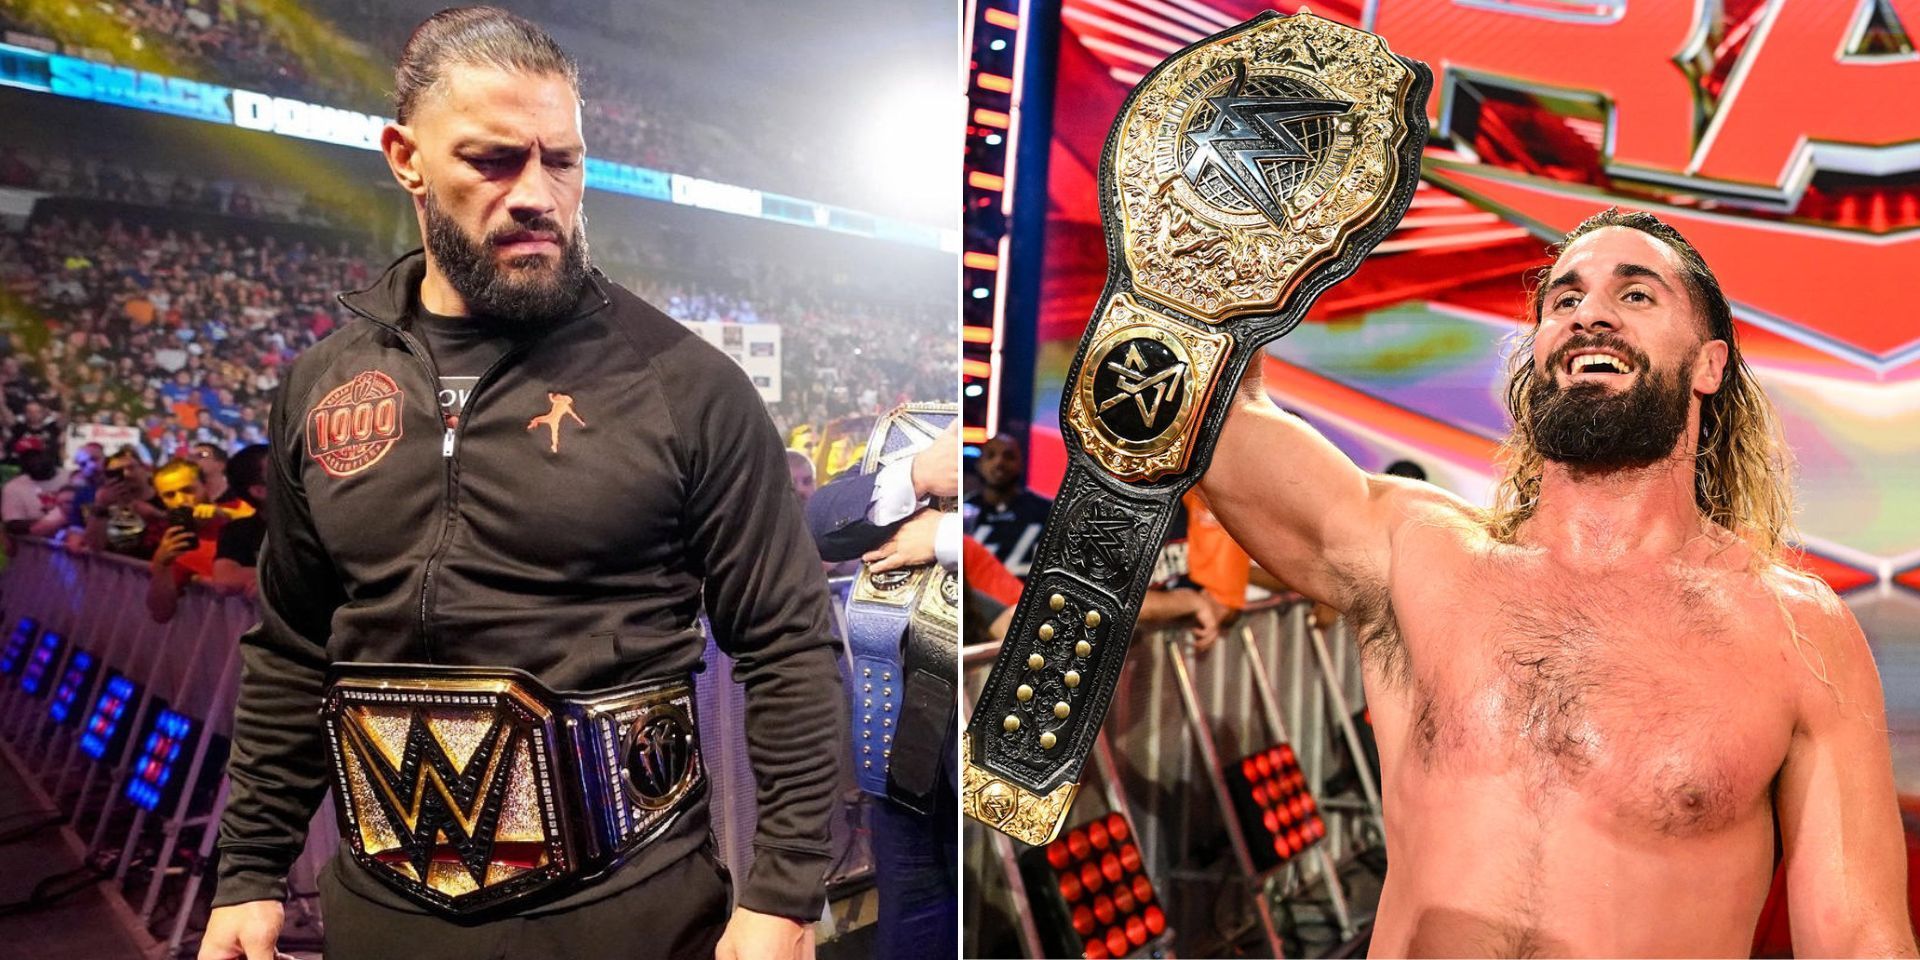 Could we see a unification match between Roman Reigns and Seth Rollins